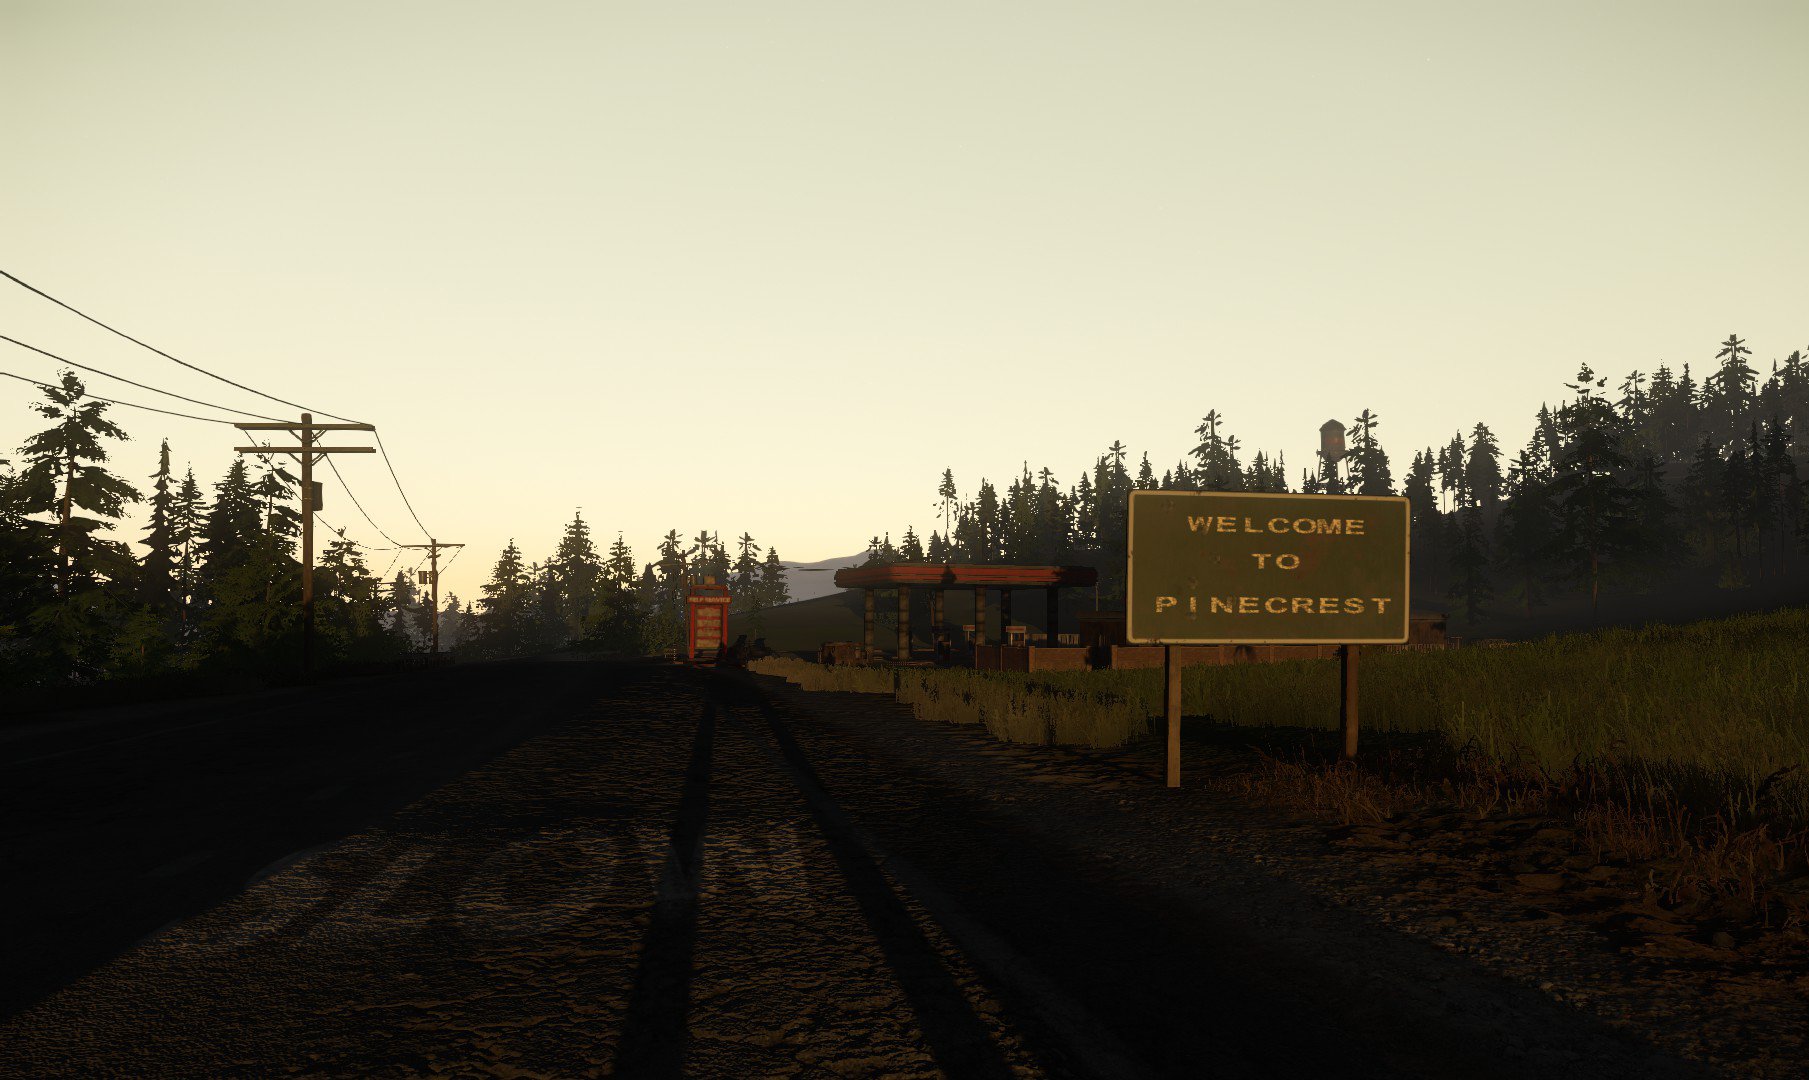 miscreated guide mod